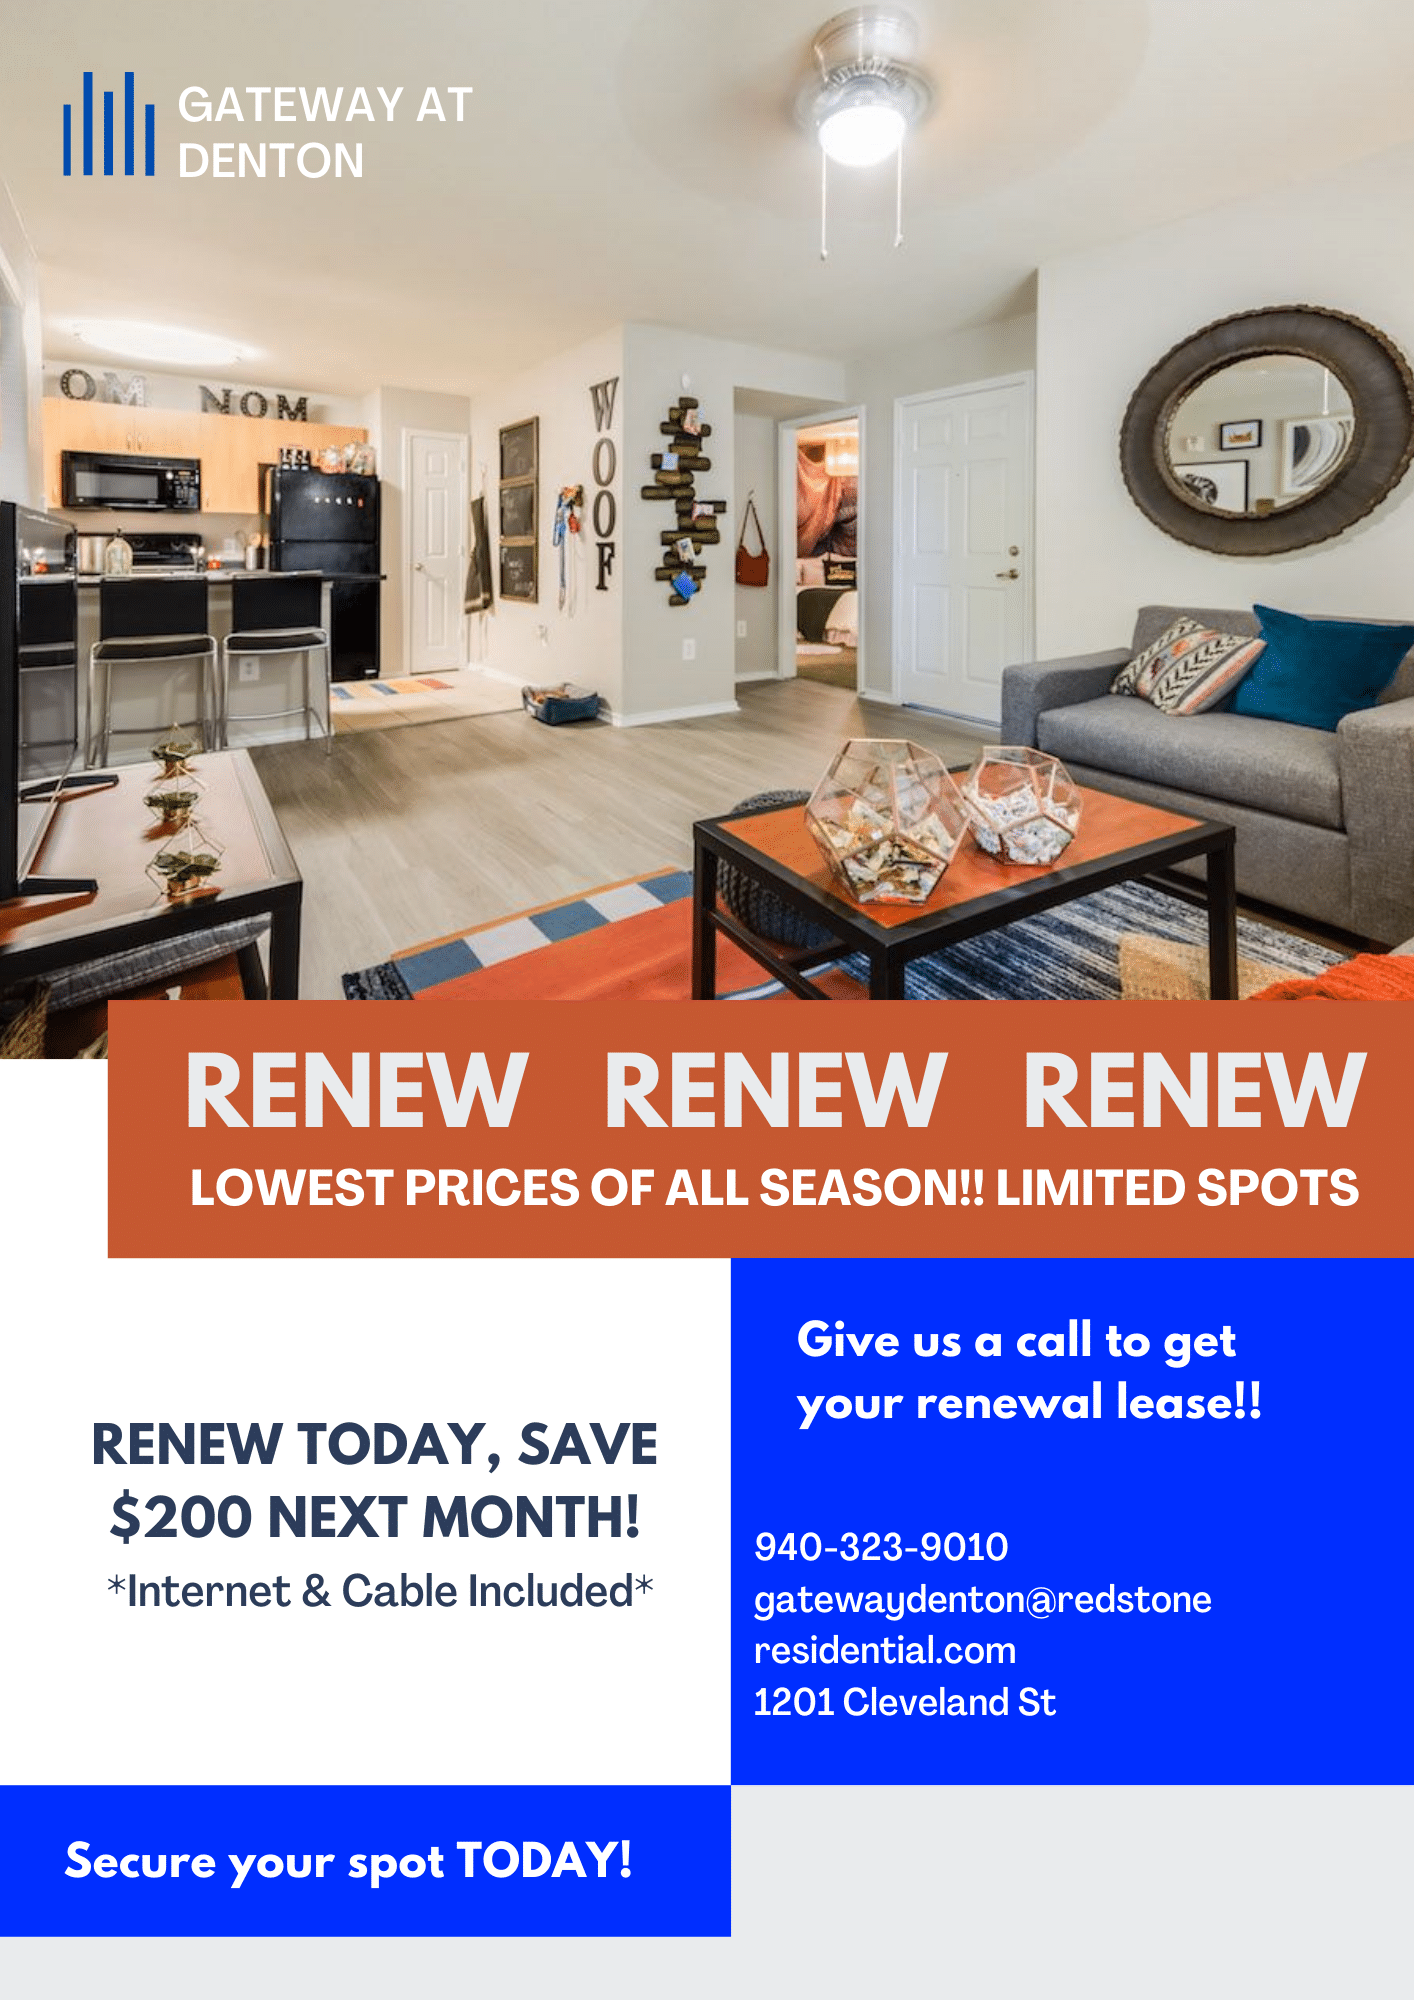 Renew today for the best rates of the year!